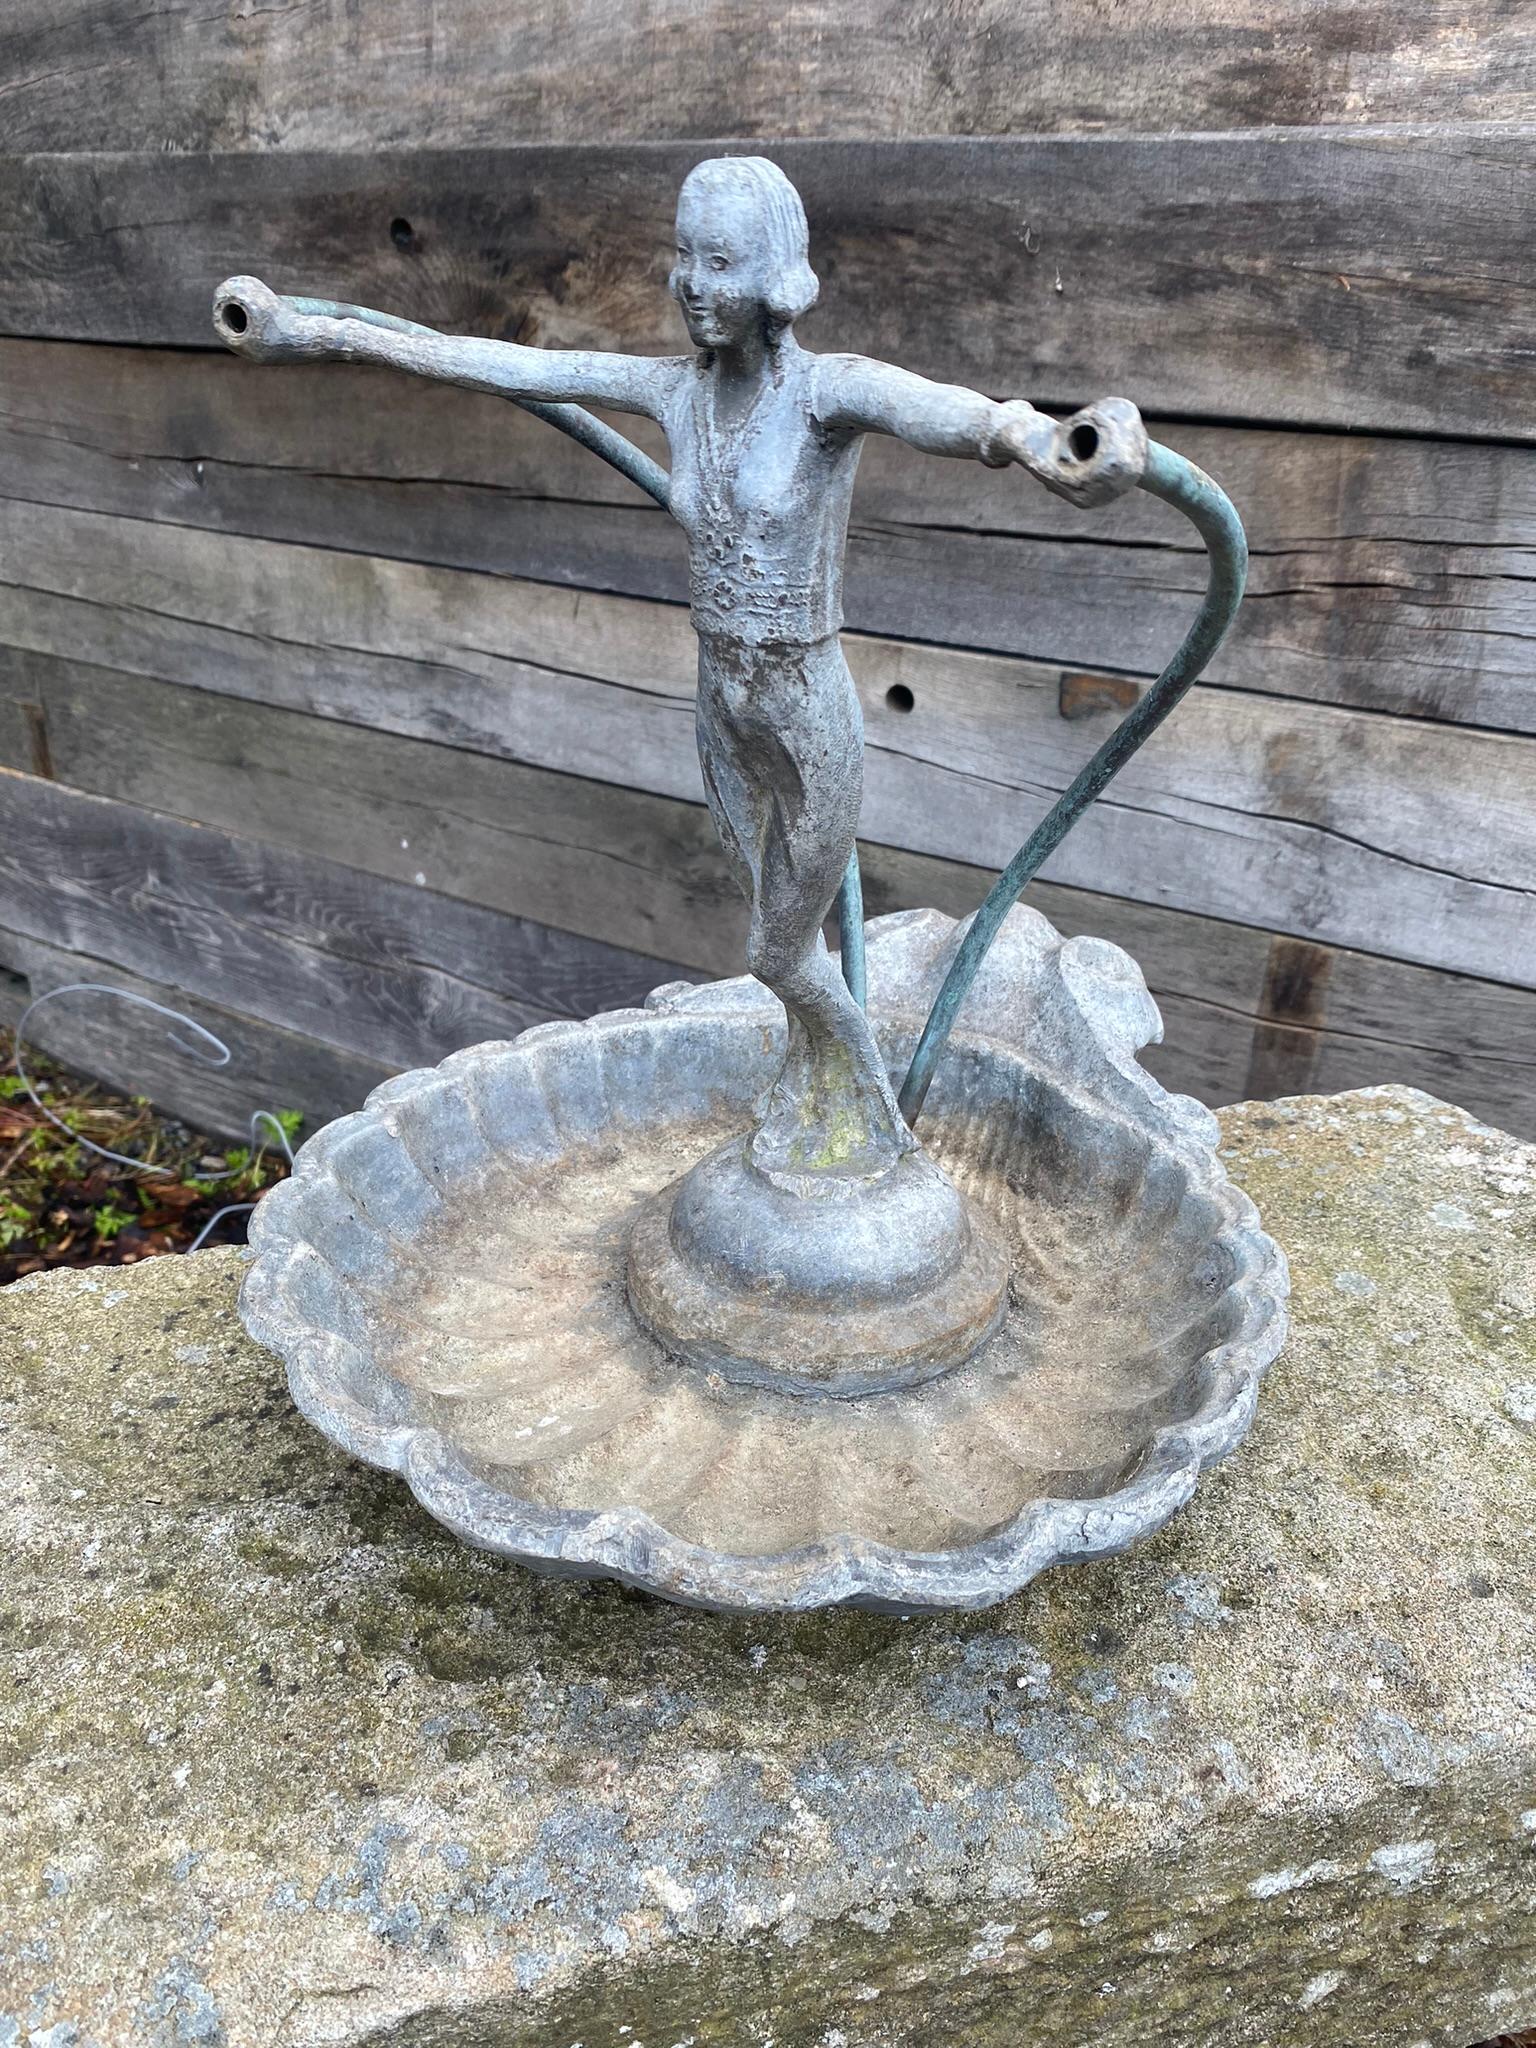 An elegant and highly unusual figural fountainhead. Made from cast lead, this is a late 19th century / early 20th century piece of superb quality. The lady figure is standing upright and has a graceful appearance leaning forward and holding two